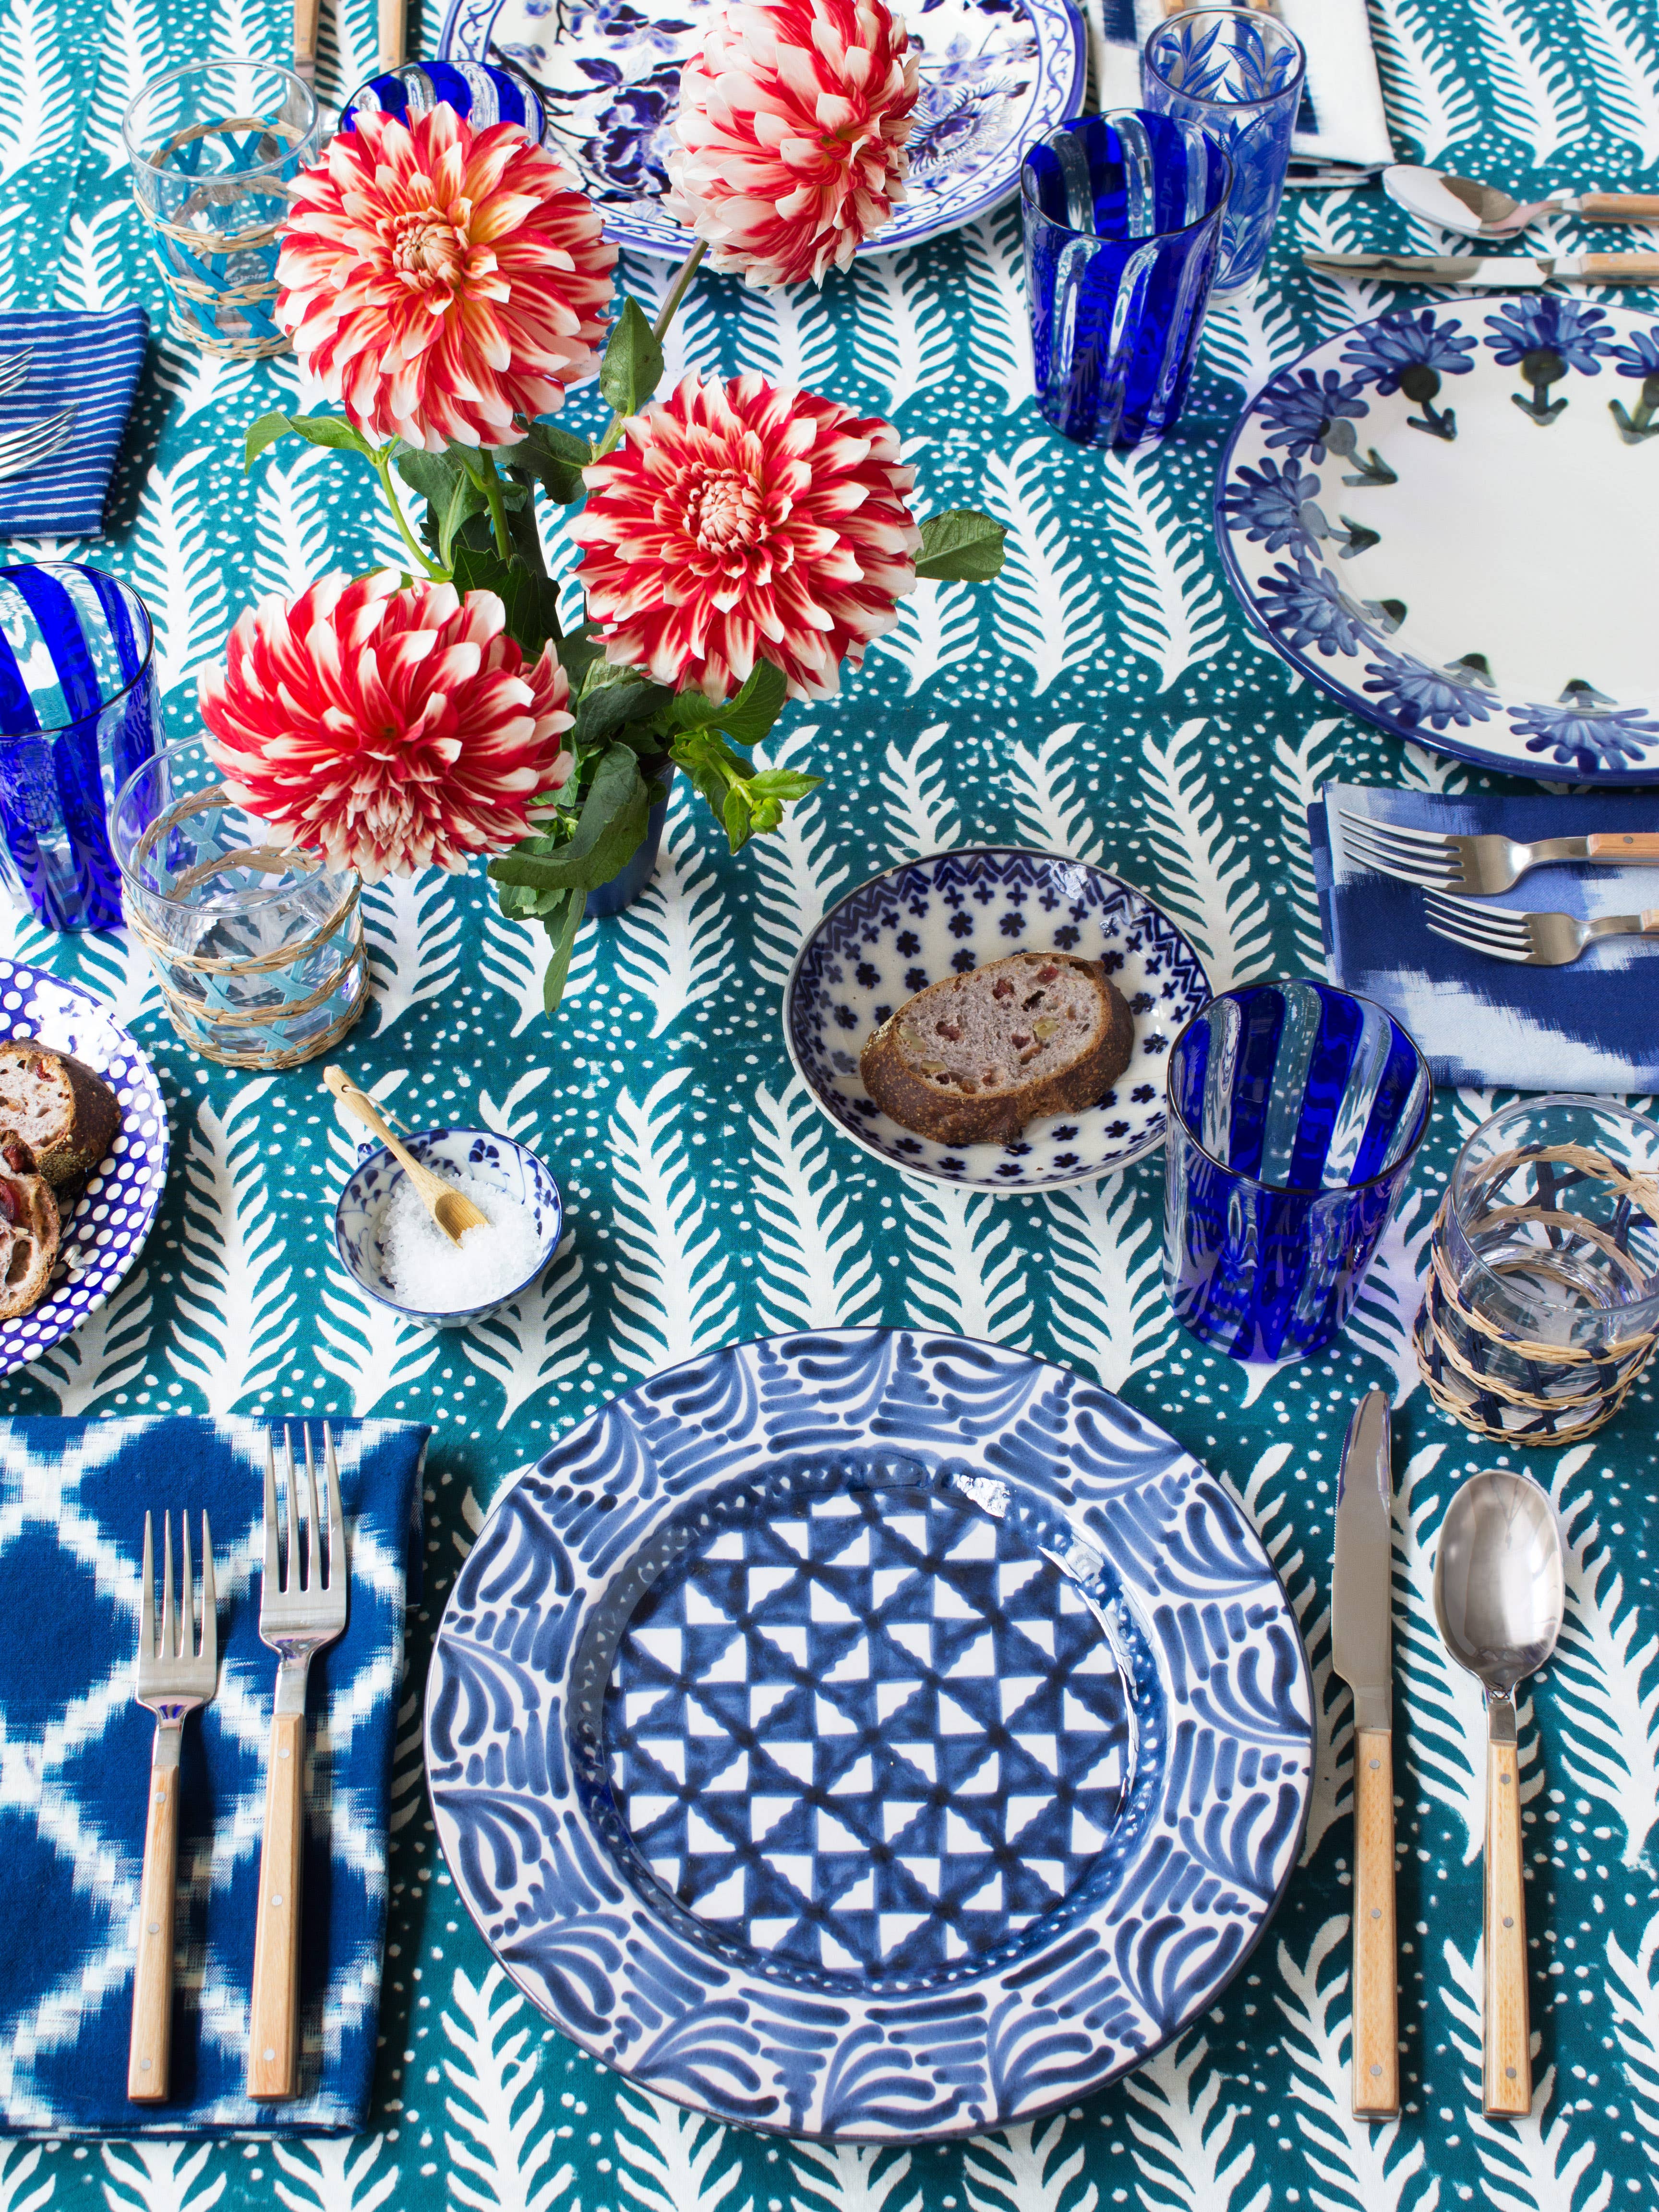 Impress Your Dinner Guests in The Most Maximalist Way